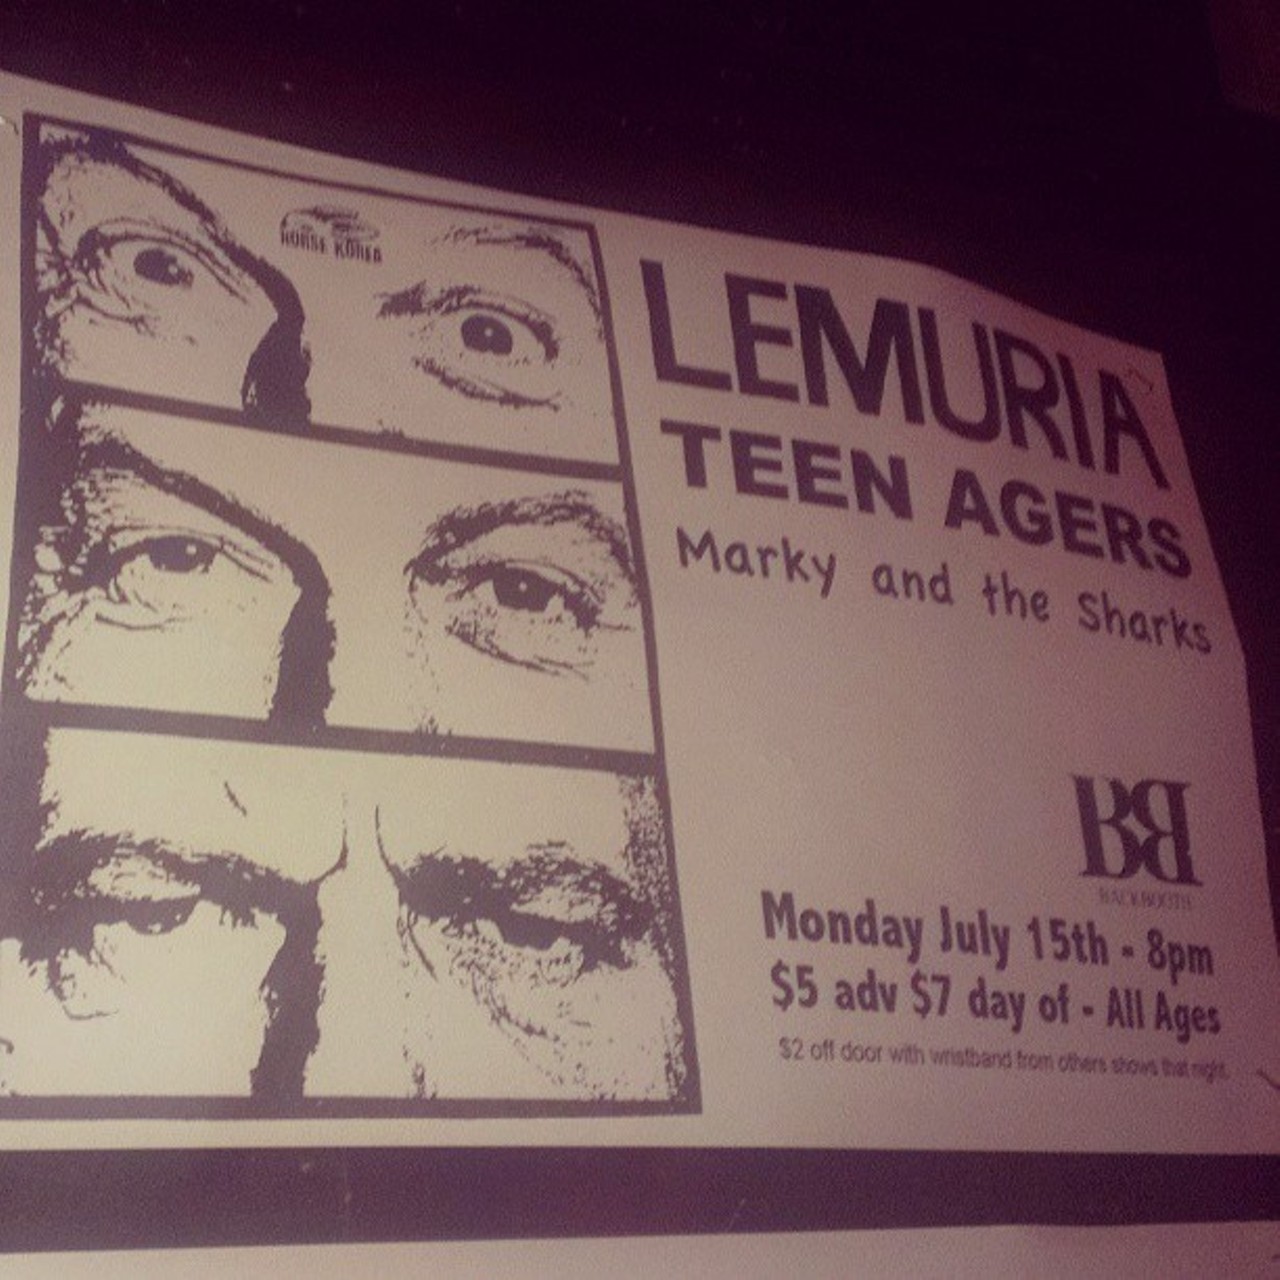 Lemuria at Backbooth with Teen Agers July 15